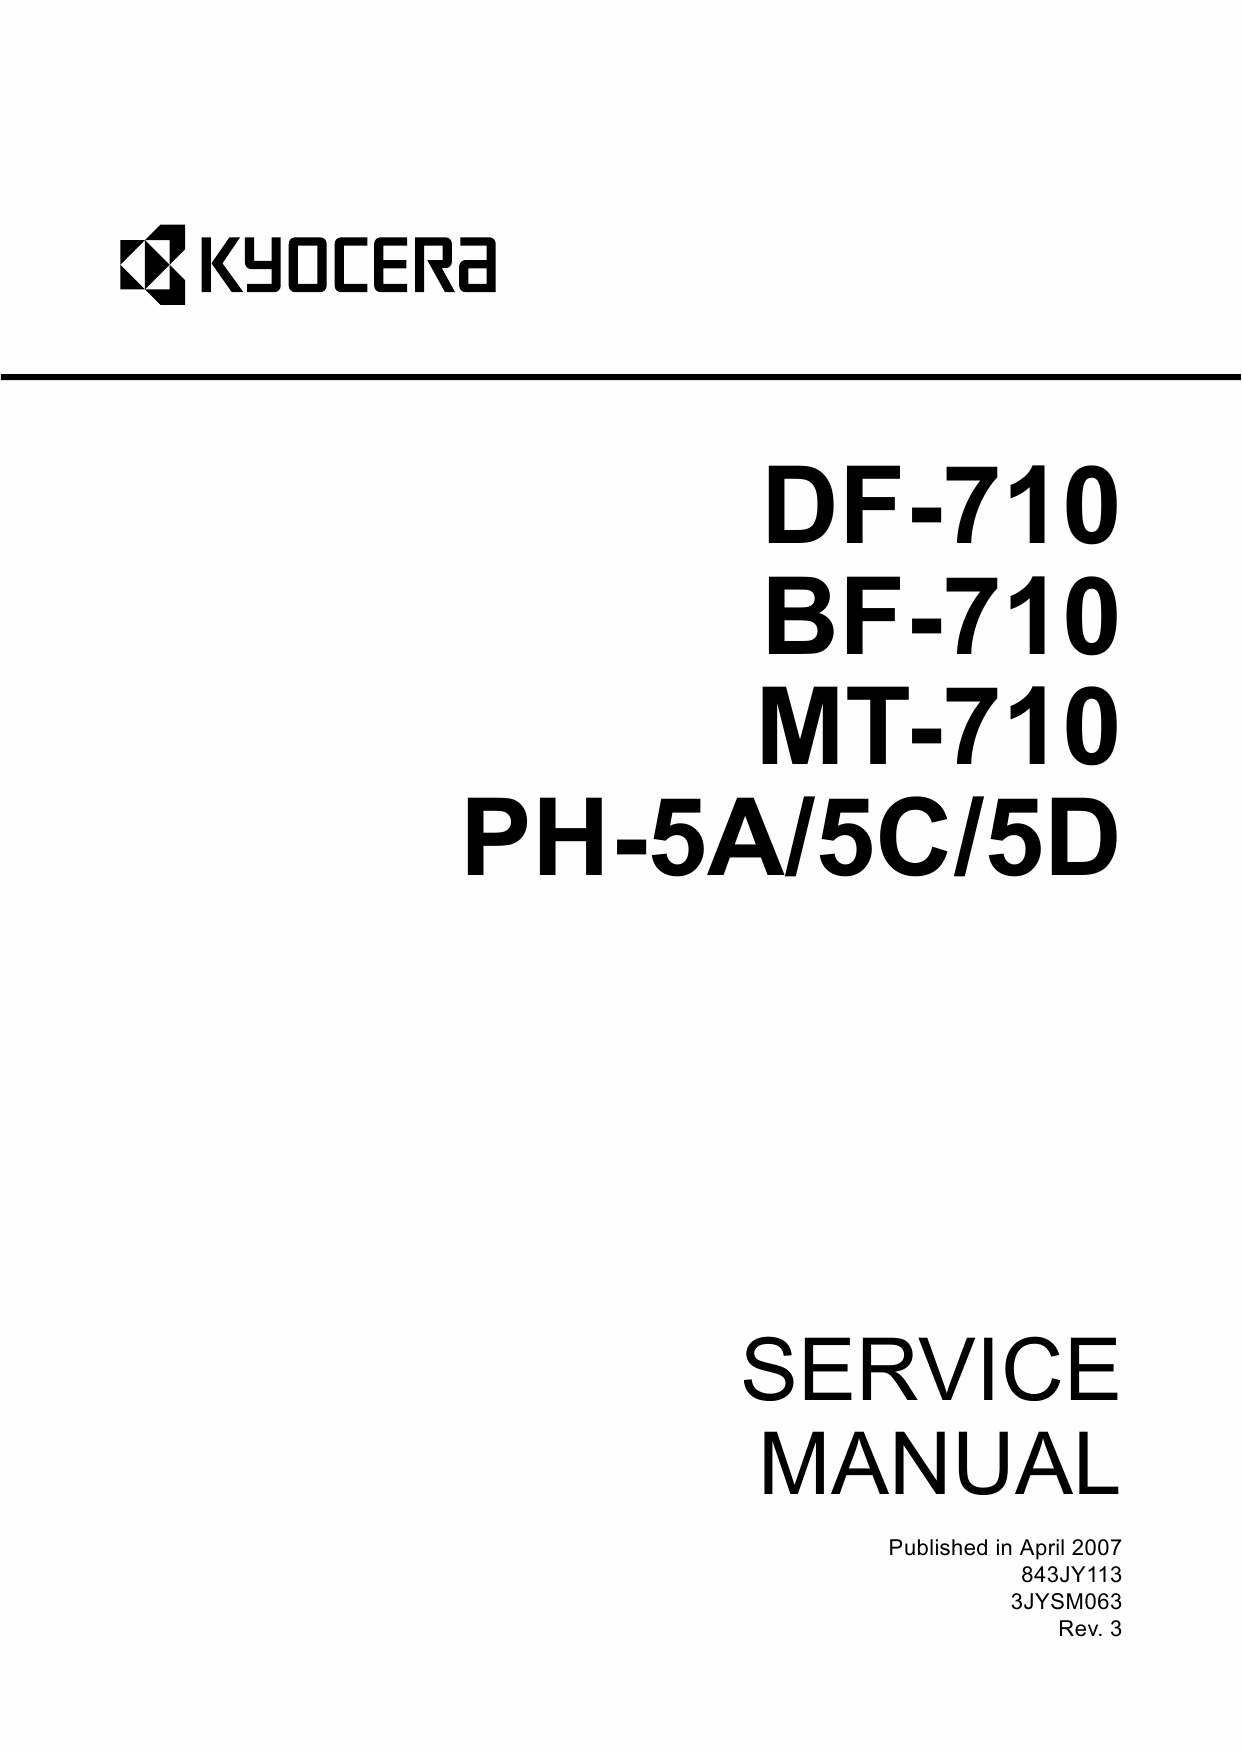 KYOCERA Options Document-Feeder DF-710 BF-710 MT-710 PH-5A-5C-5D Service Manual-1